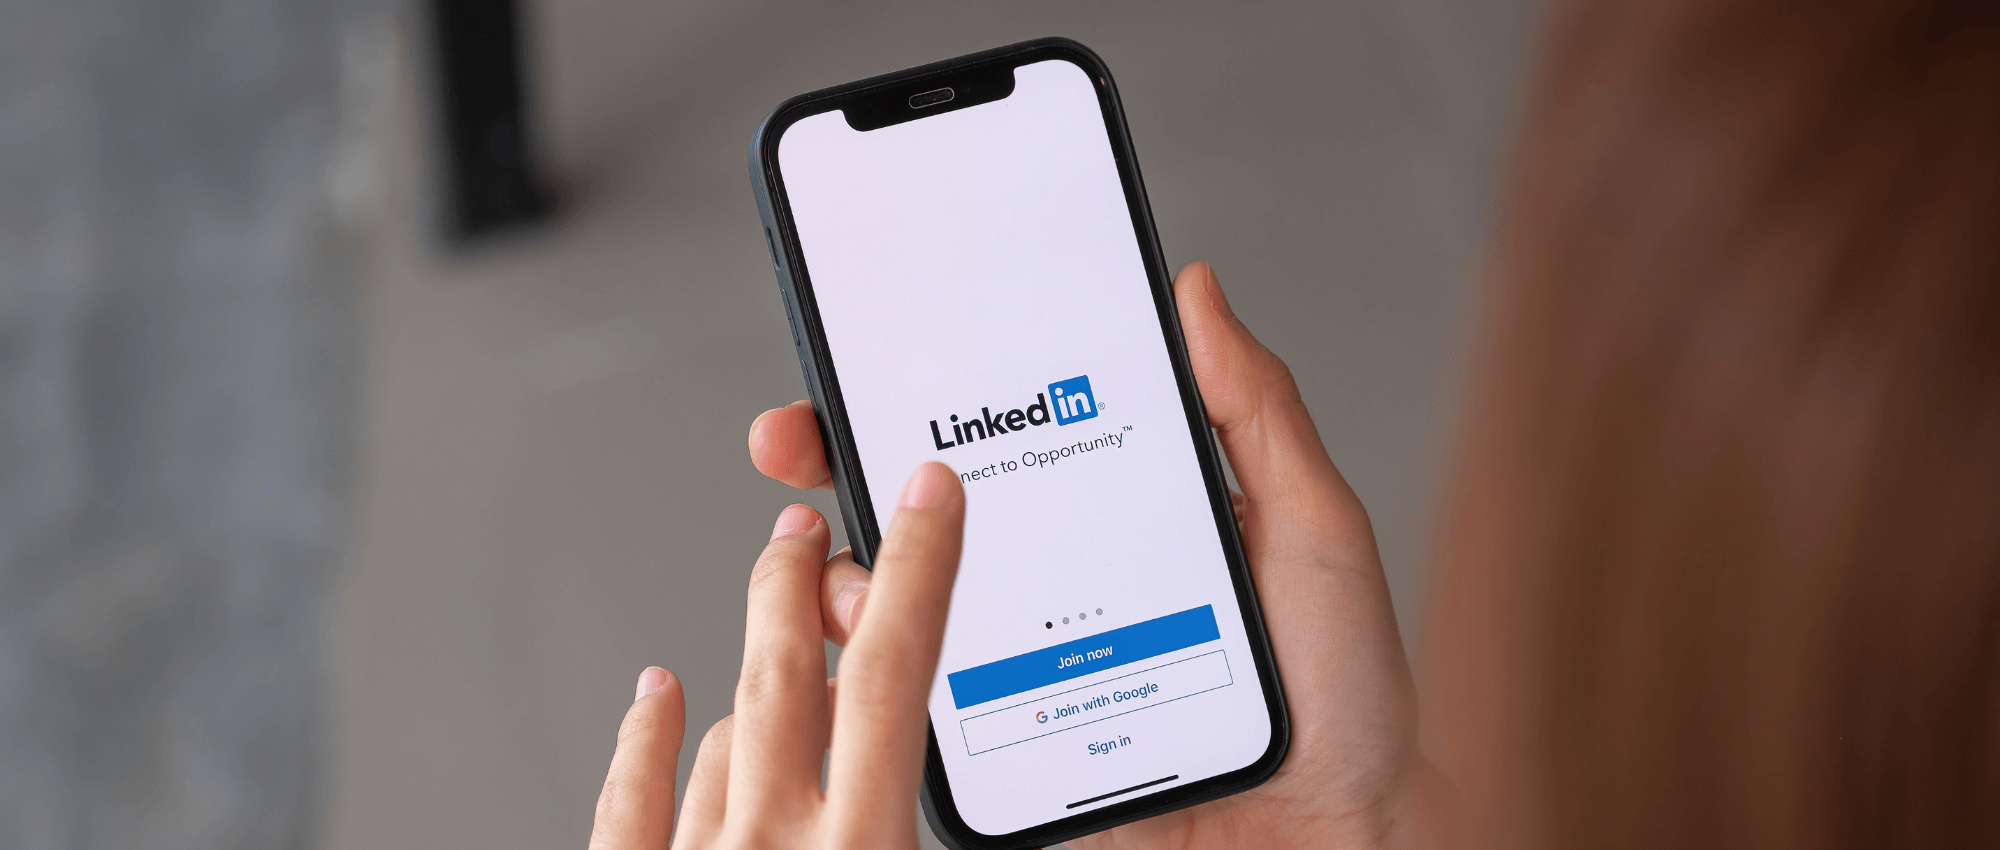 using linkedin for a job search